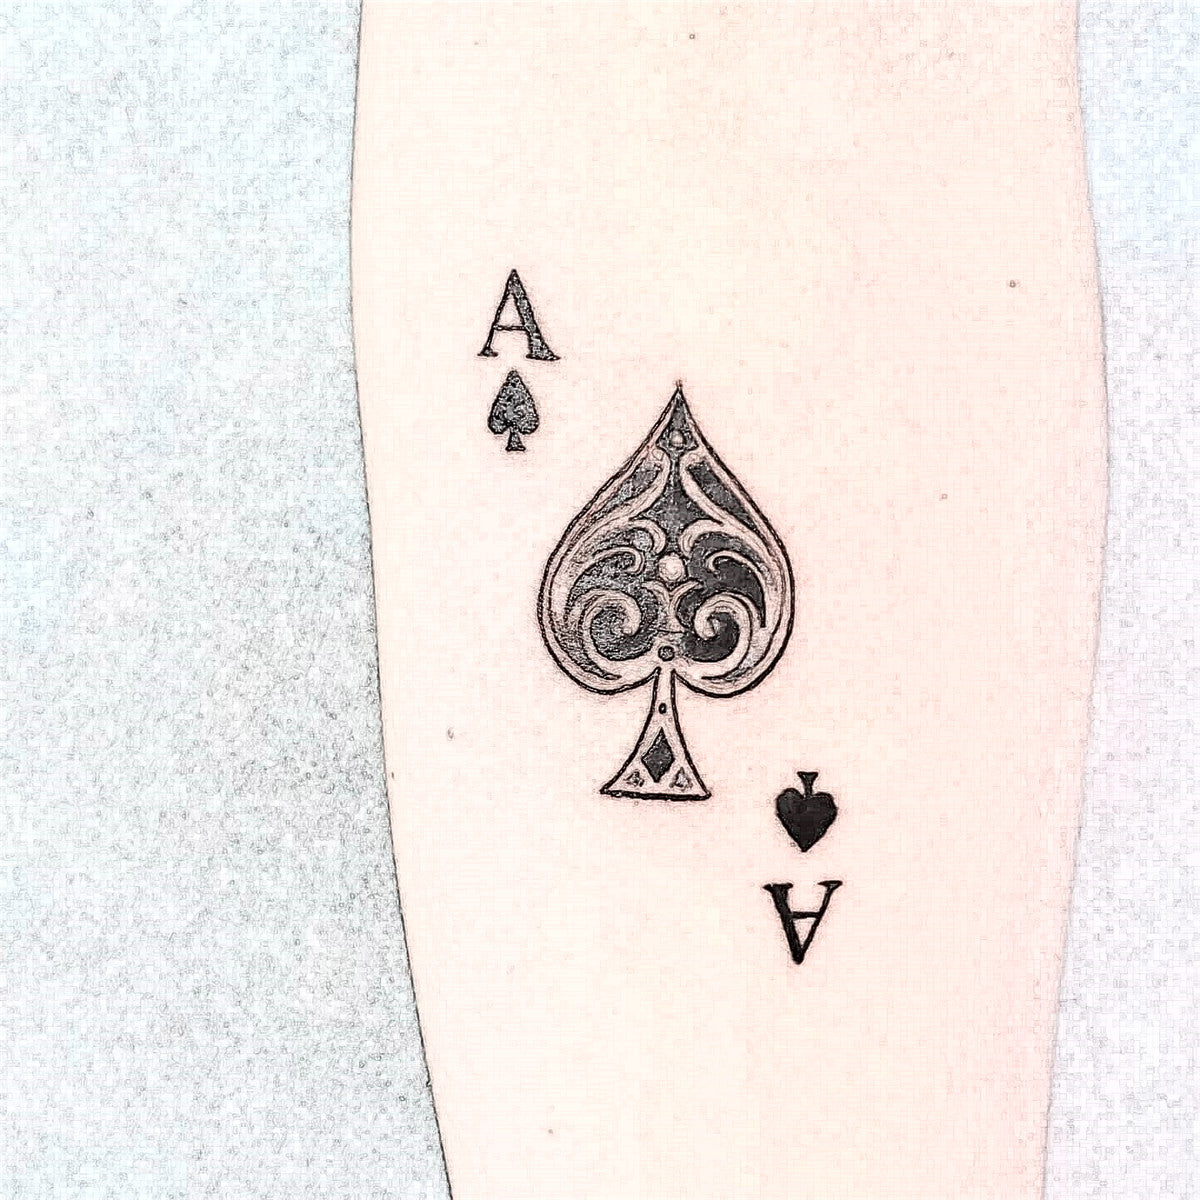 Top more than 71 ace of spades tattoos best  thtantai2